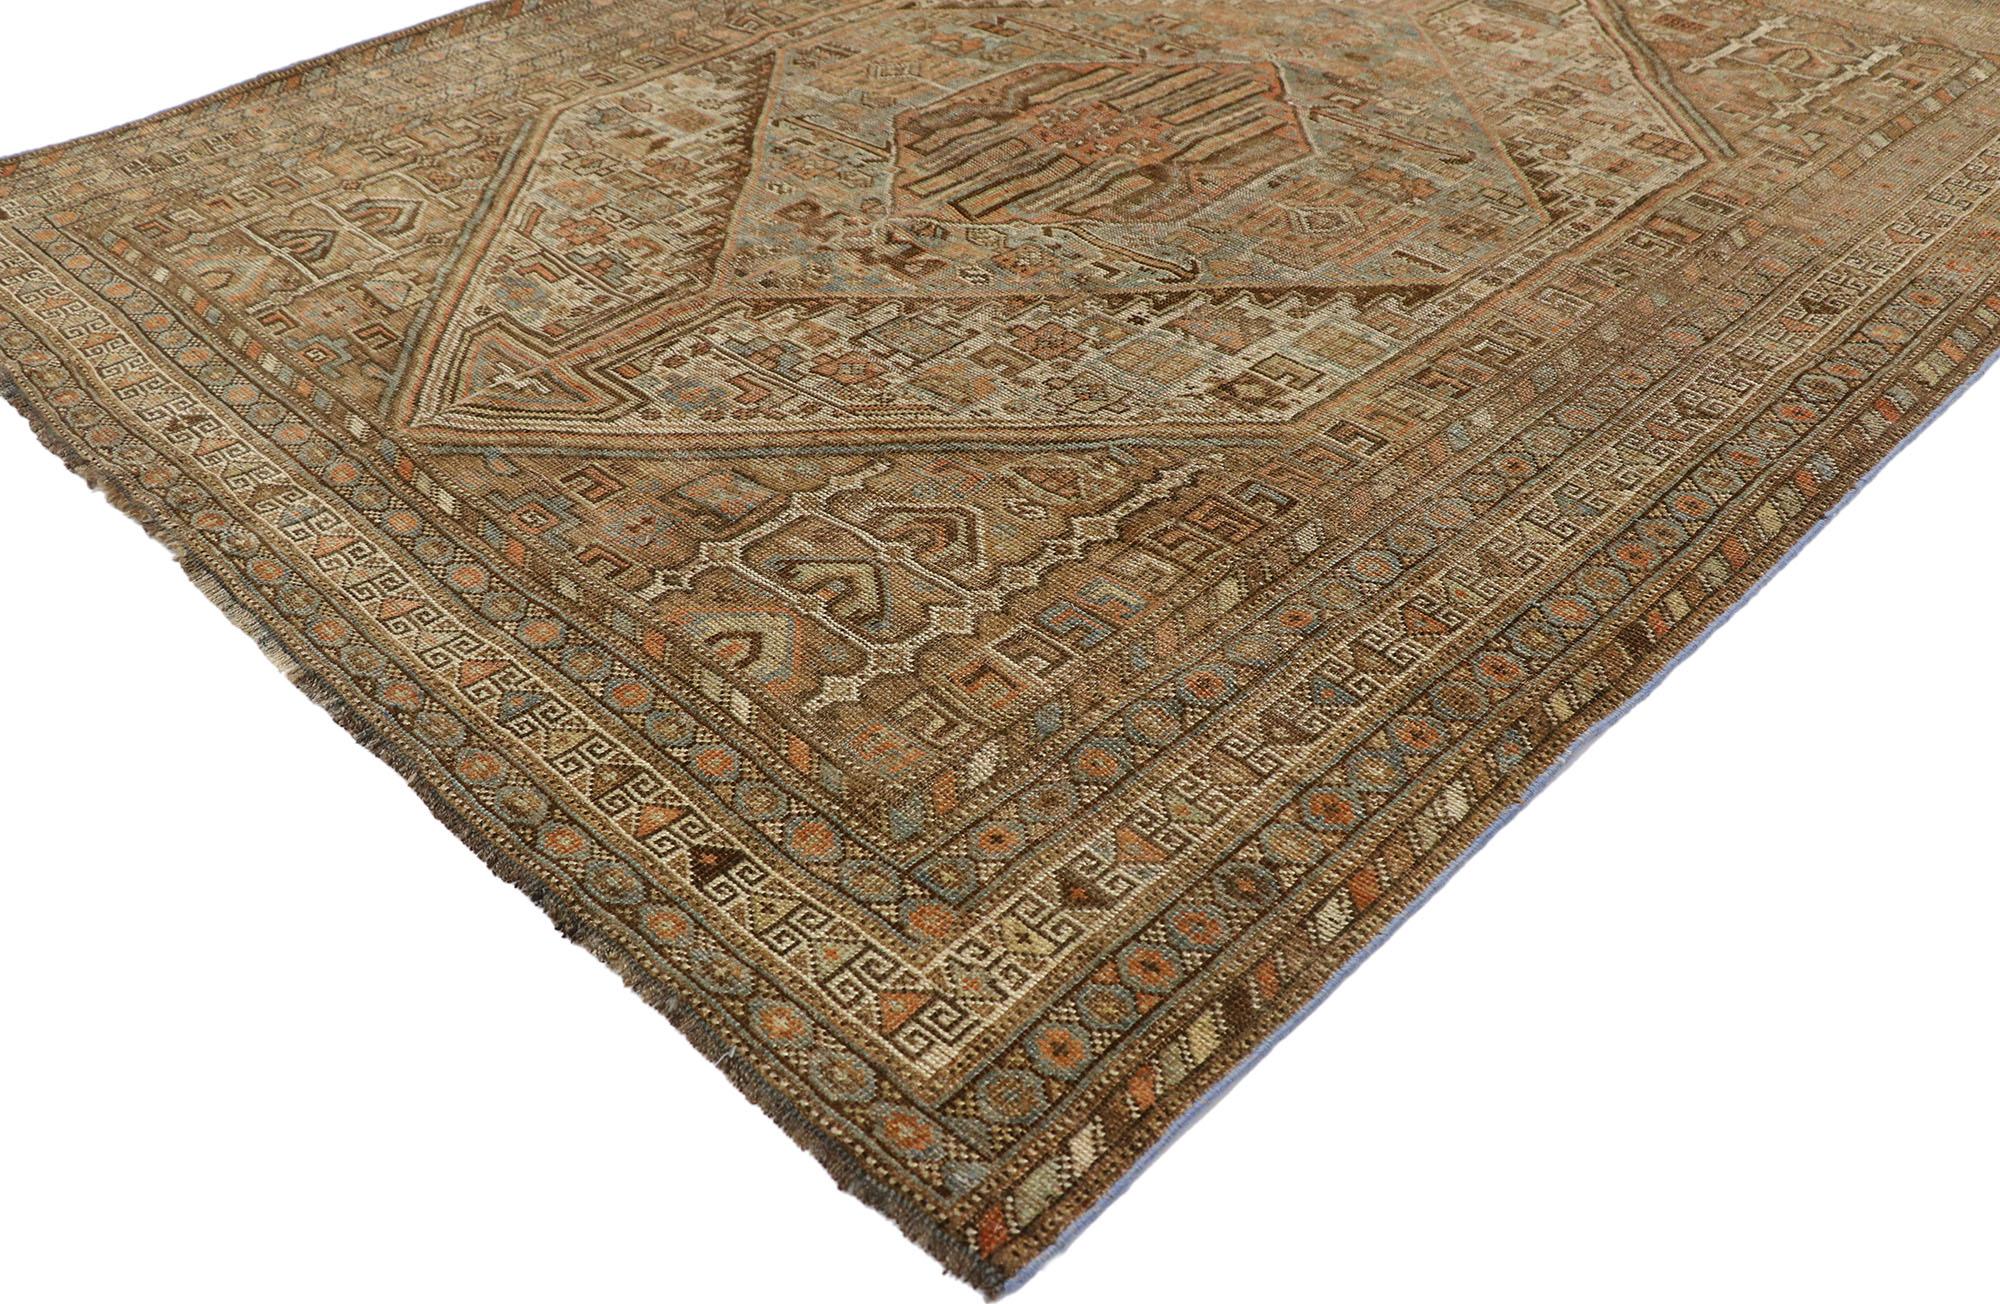 60849, antique Persian Shiraz rug with modern tribal style 05'02 x 06'02. Warm and inviting with its nomadic charm, this hand-knotted wool antique Persian Shiraz rug beautifully embodies modern tribal style. The abrashed cut-out field features a